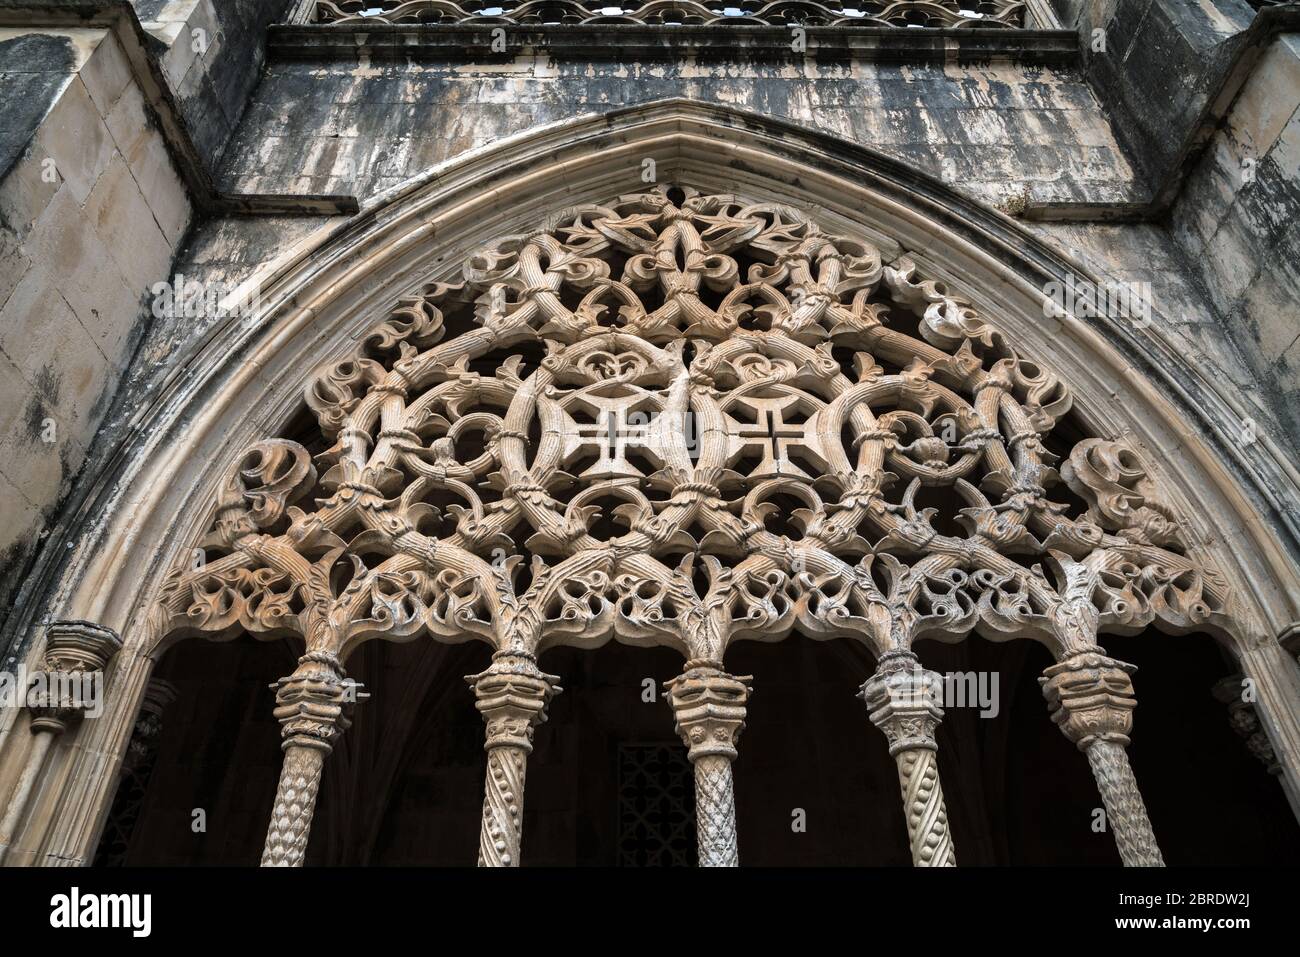 Colonettes, supporting intricate arcade screens in Royal Cloister at the Monastery of Saint Mary of the Victory in Batalha, Portugal Stock Photo